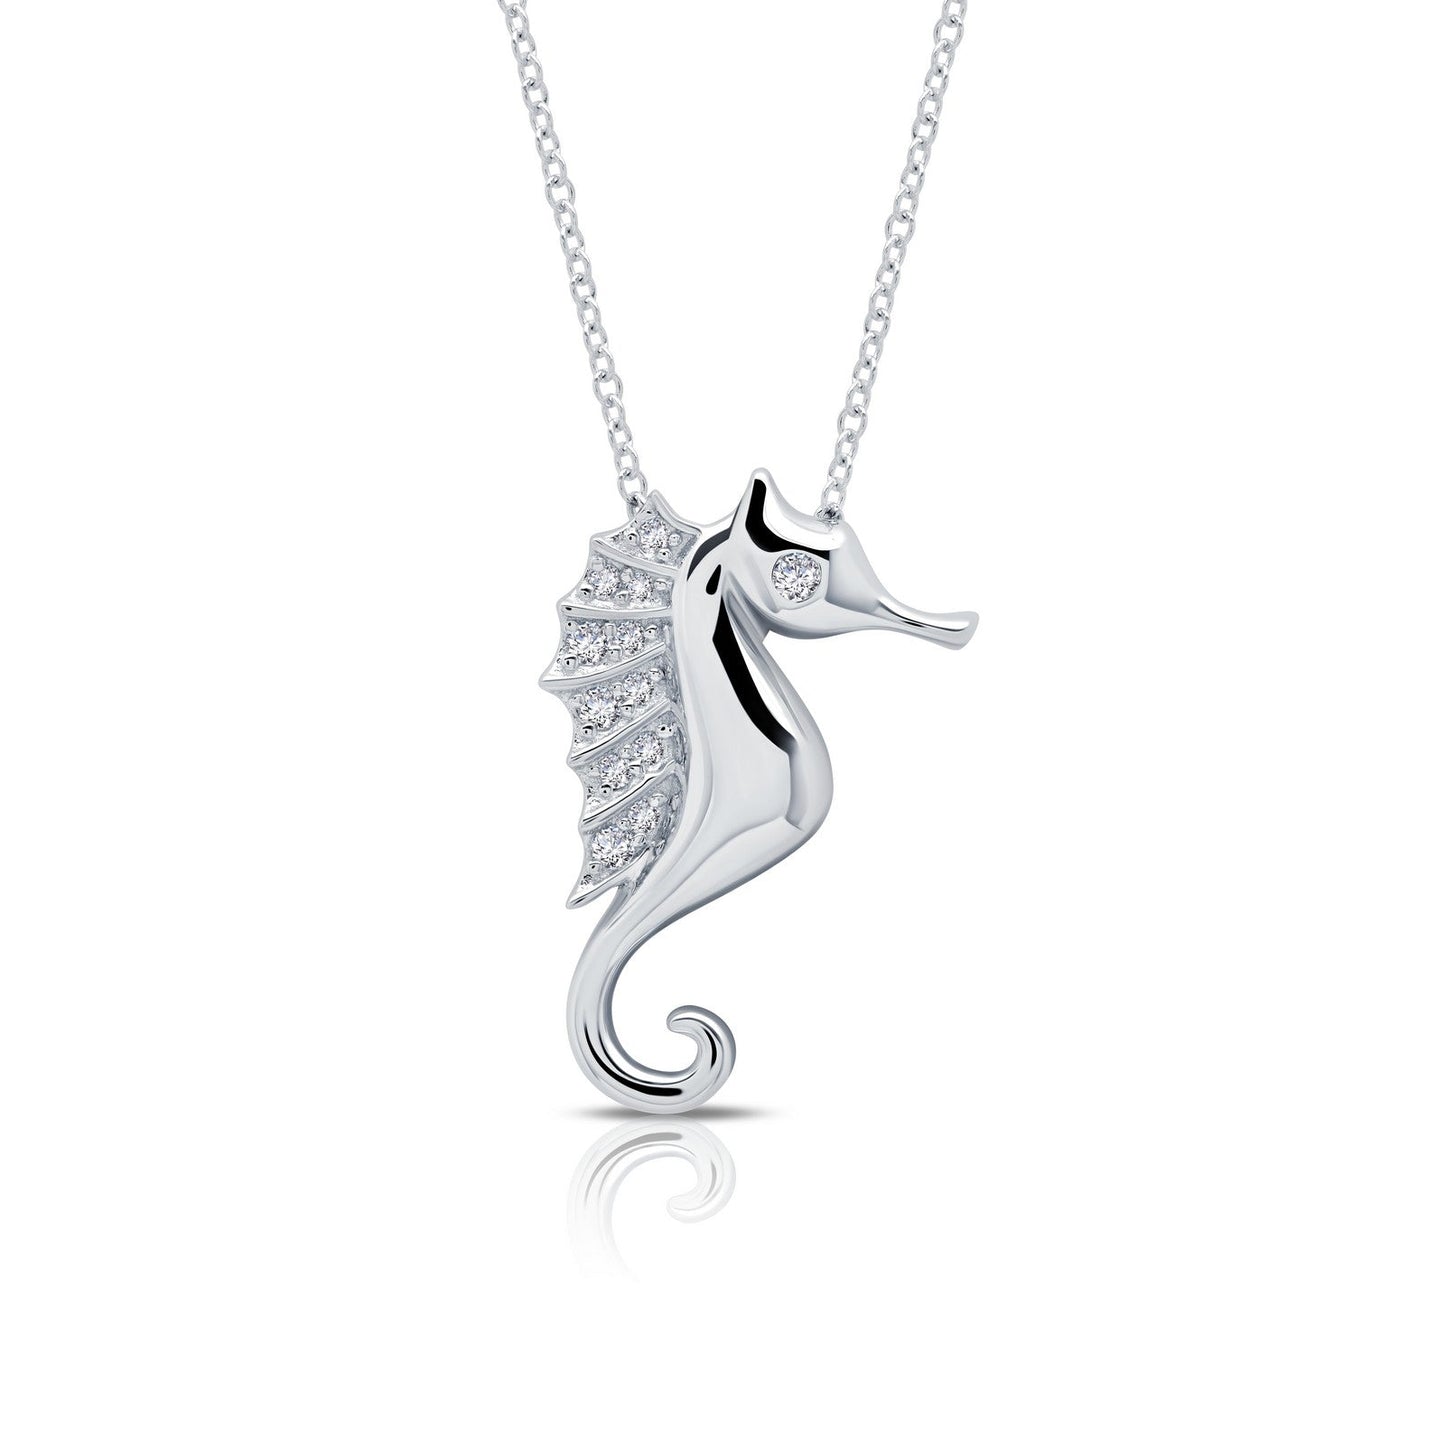 Lafonn Whimsical Seahorse Necklace 13 Stone Count N0159CLP20